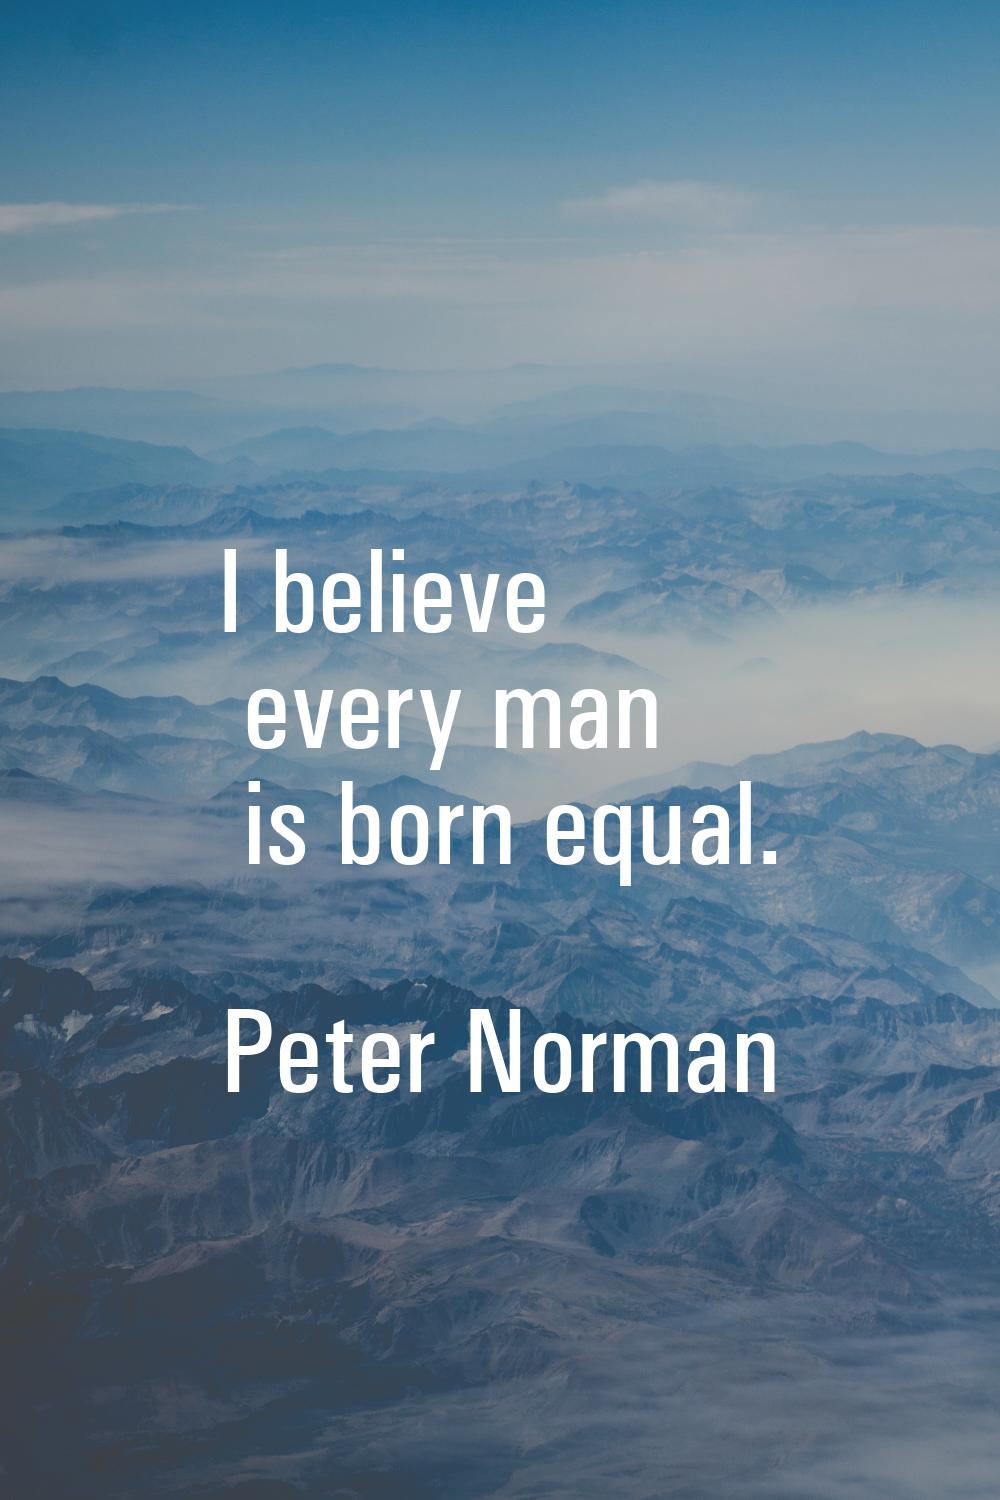 I believe every man is born equal.